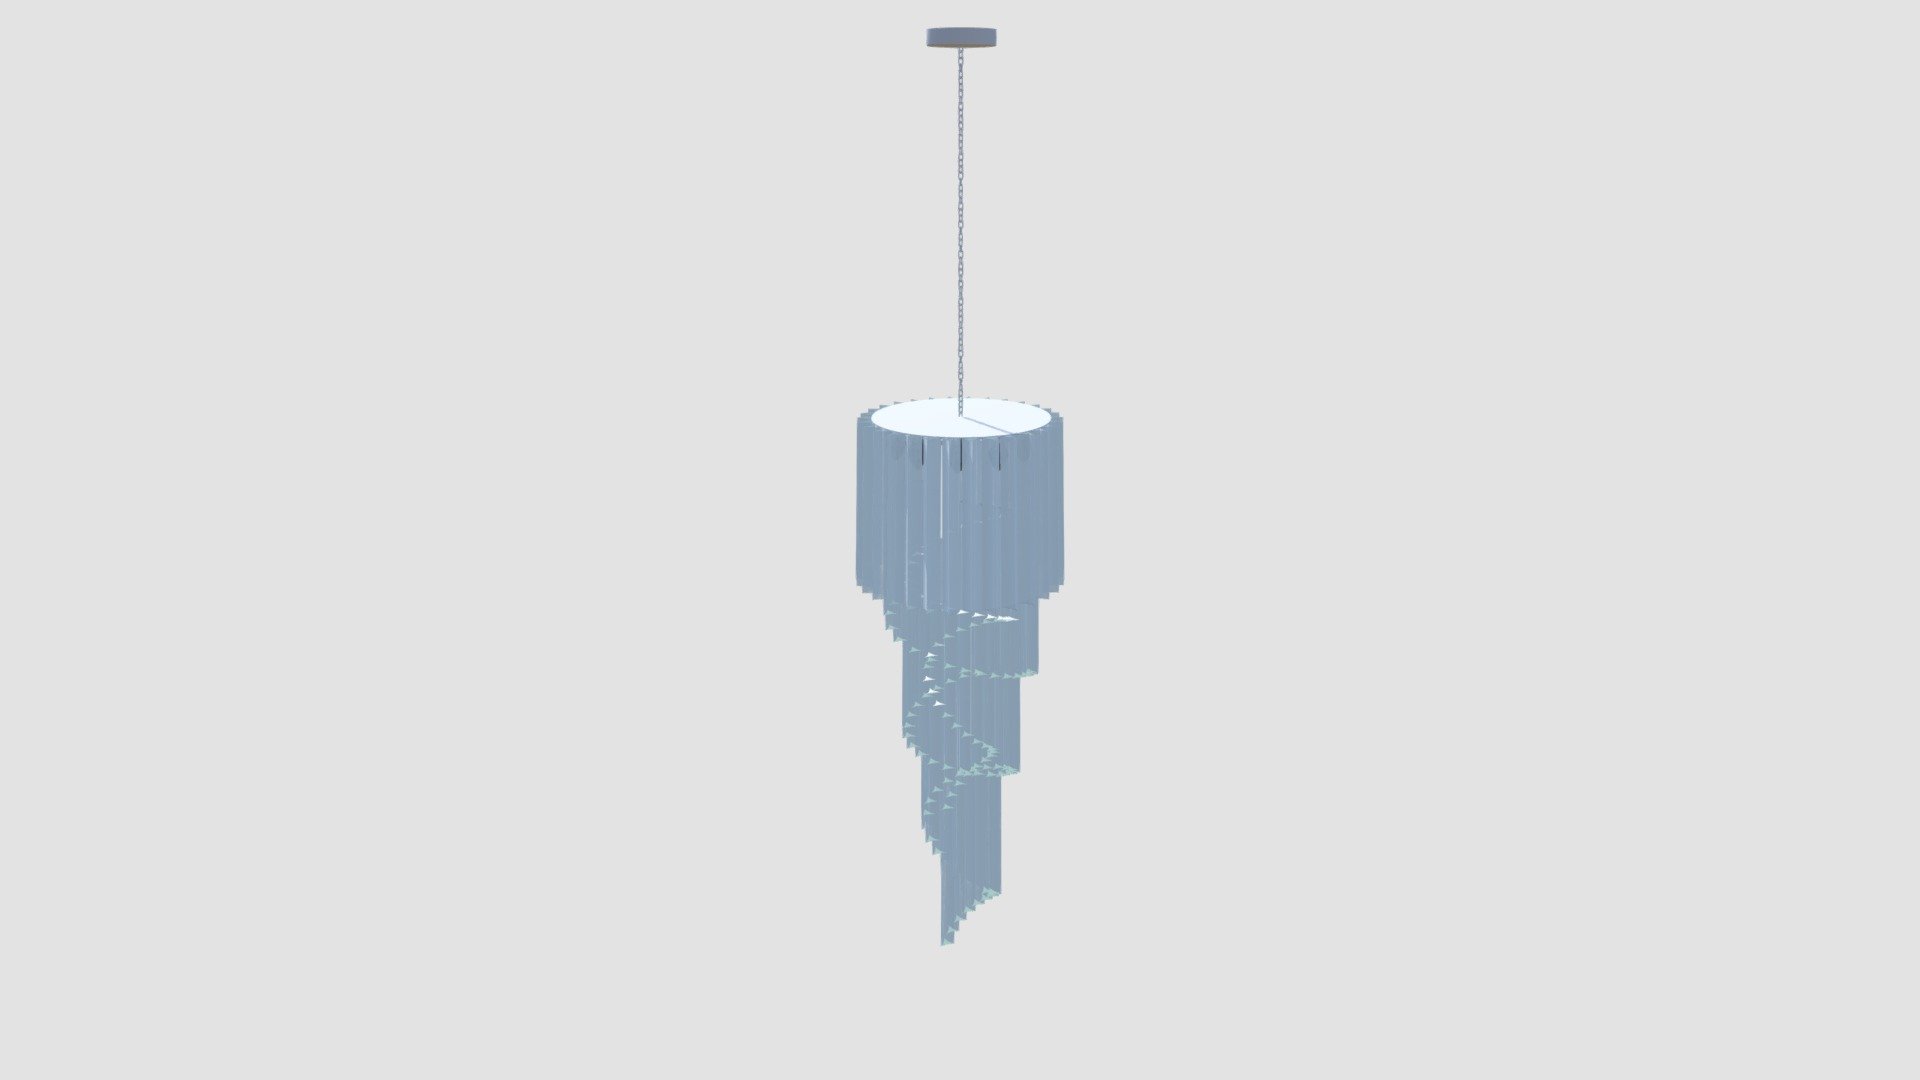 Highly detailed 3d model of chandelier with all textures, shaders and materials. It is ready to use, just put it into your scene 3d model